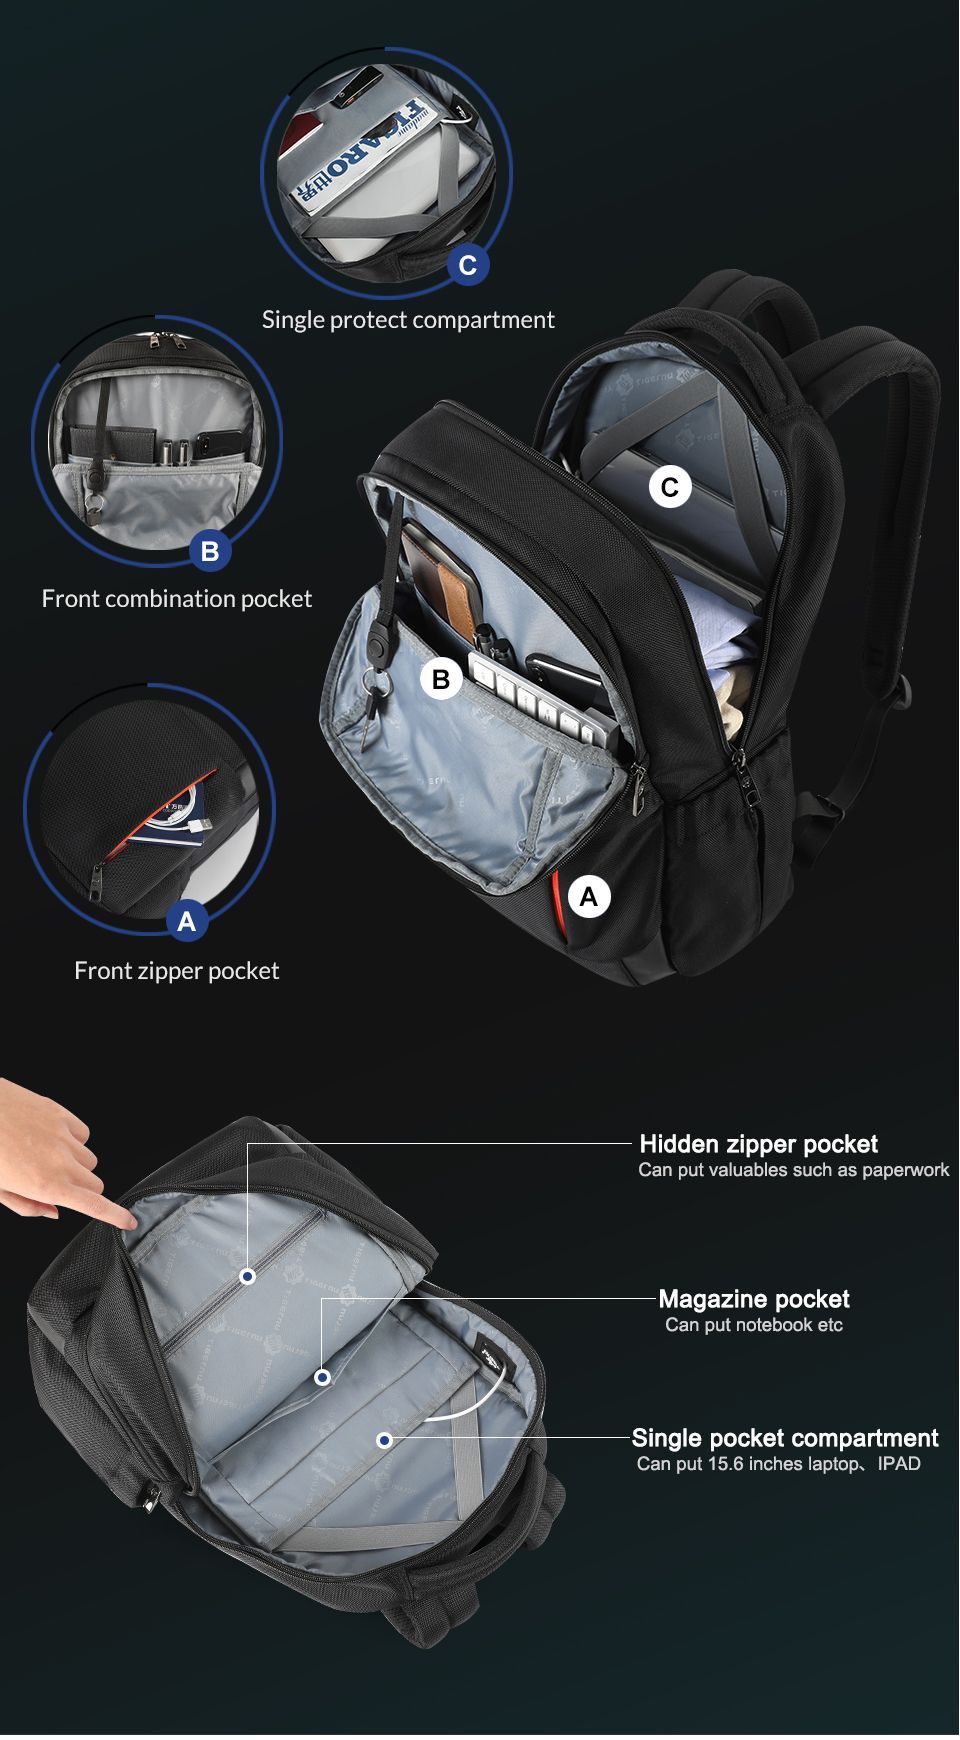 Tigernu-156-inch-Laptop-Backpack-Anti-Theft-Zipper-with-USB-Charging-Unisex-Waterproof-Laptop-Bag-1643000